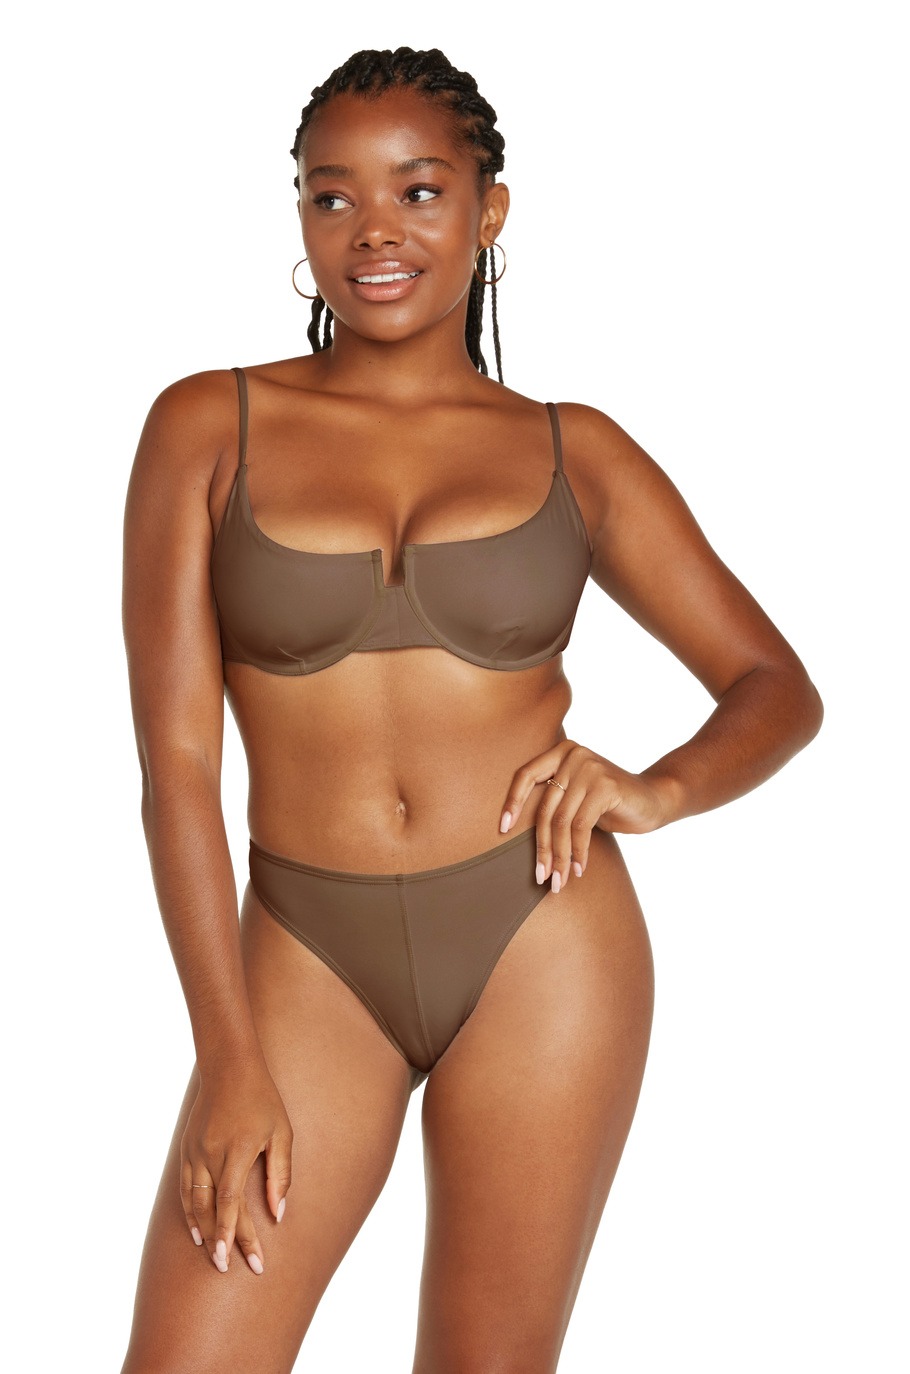 A dark female model with brown bra and panty front view